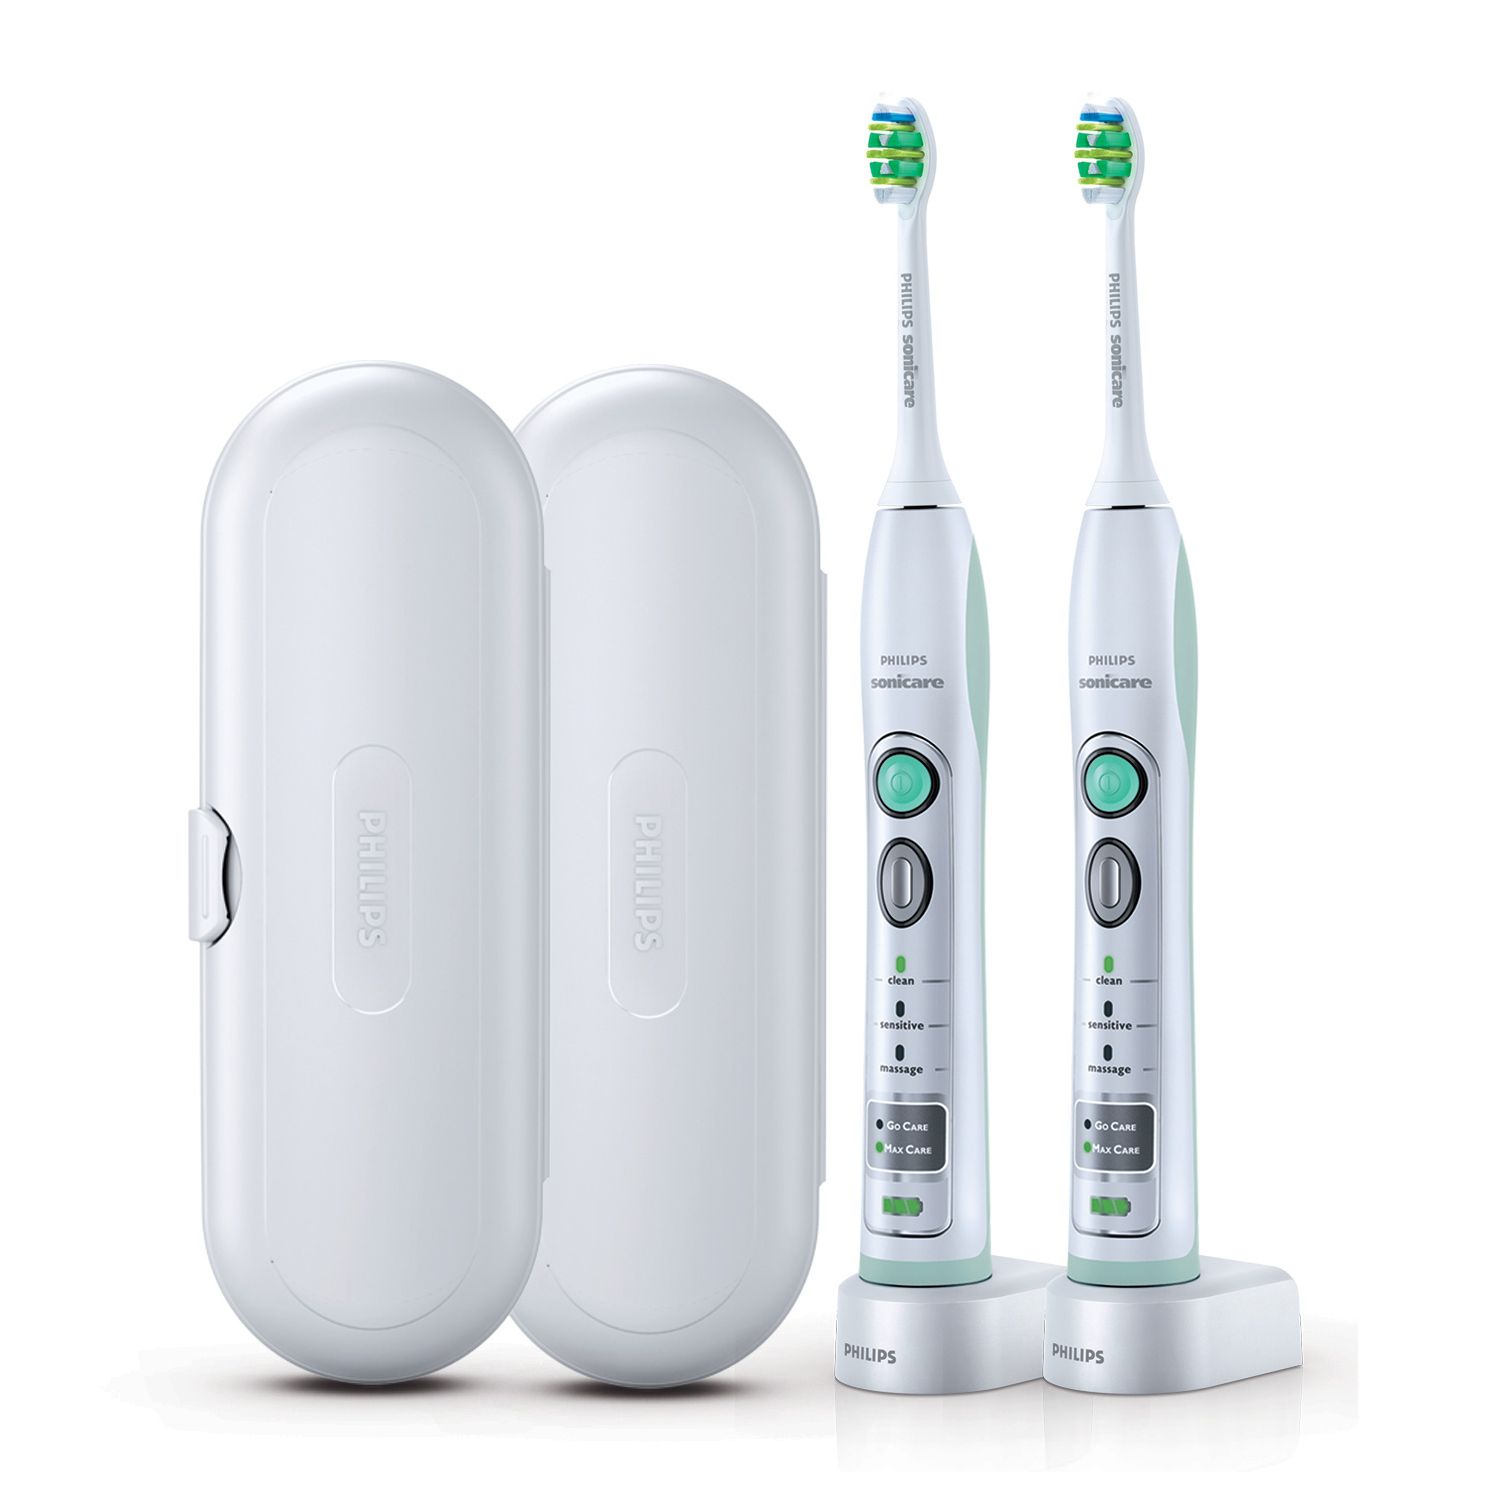 UPC 075020047809 product image for Philips Sonicare Flexcare Rechargeable Electric Toothbrush (2 pk.) | upcitemdb.com